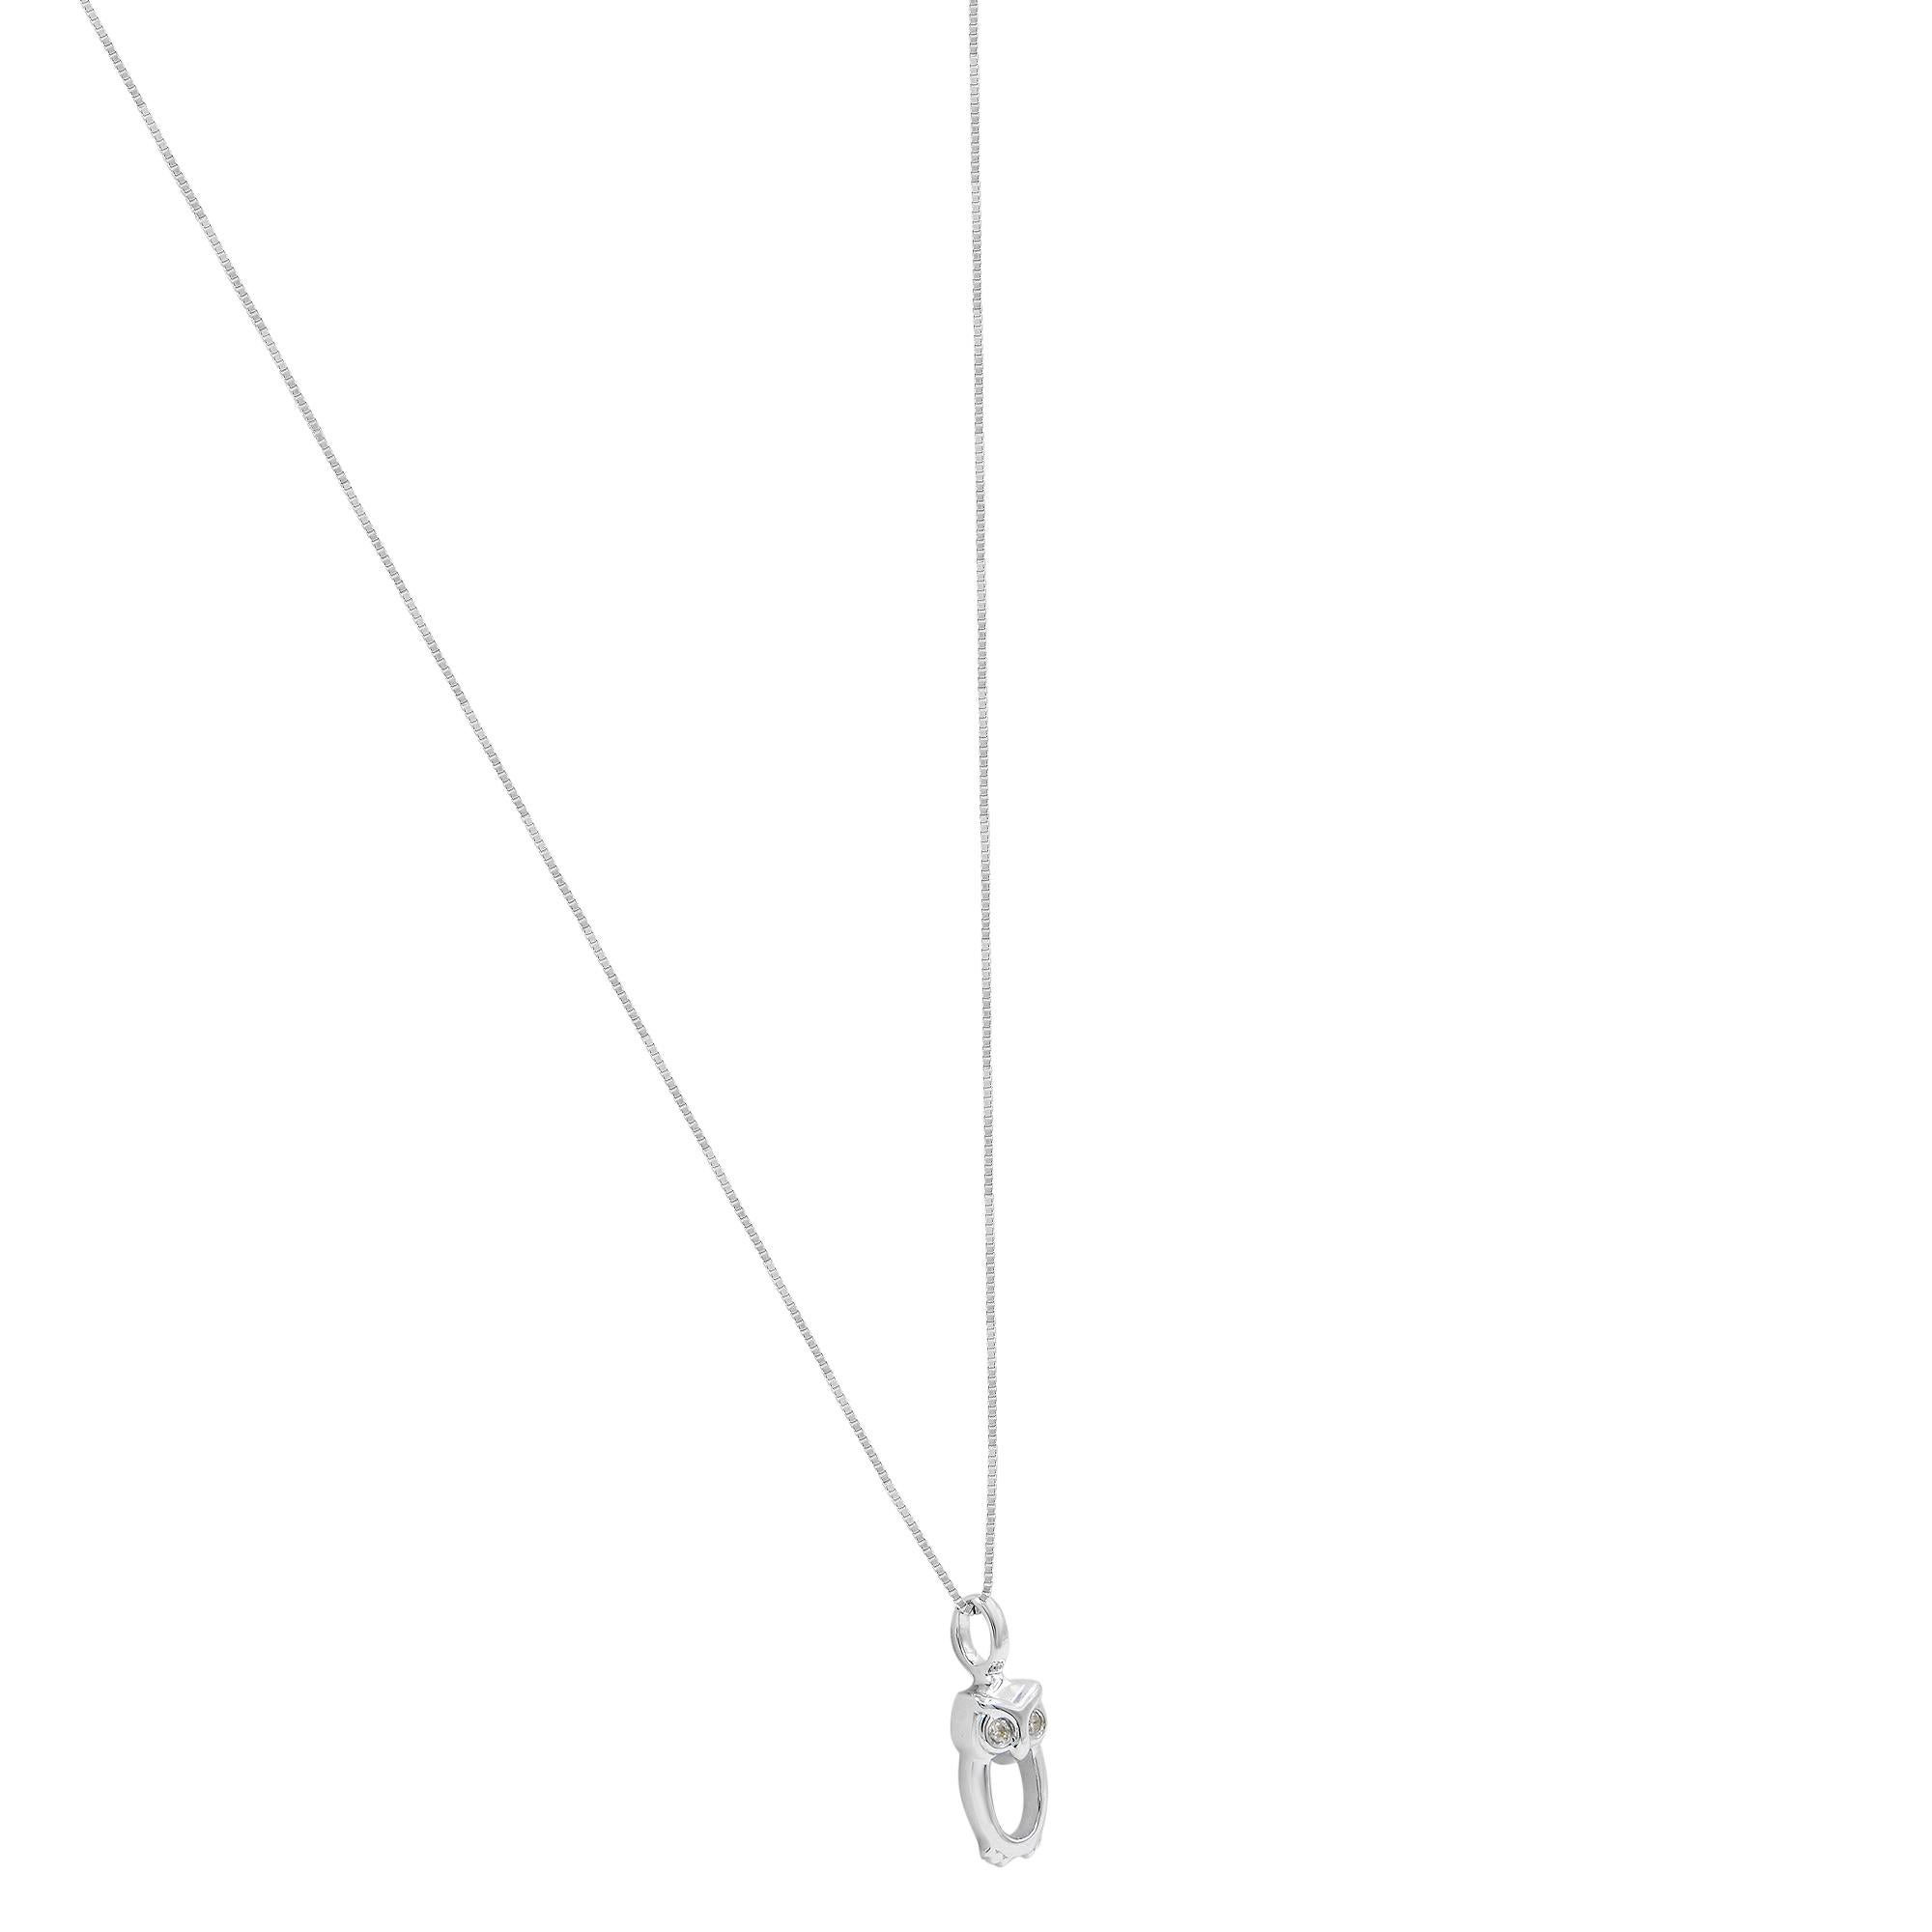 Whimsical white-gold pendant
Diamond accent stones
Total diamond weight: 0.01 carat
Cut: round
Color: G–H
Clarity: VS1–VS2
18K white gold
Polished finish
18” box chain
Spring-ring clasp
Pendant dimensions:
Owl: 3/8”x3/16”